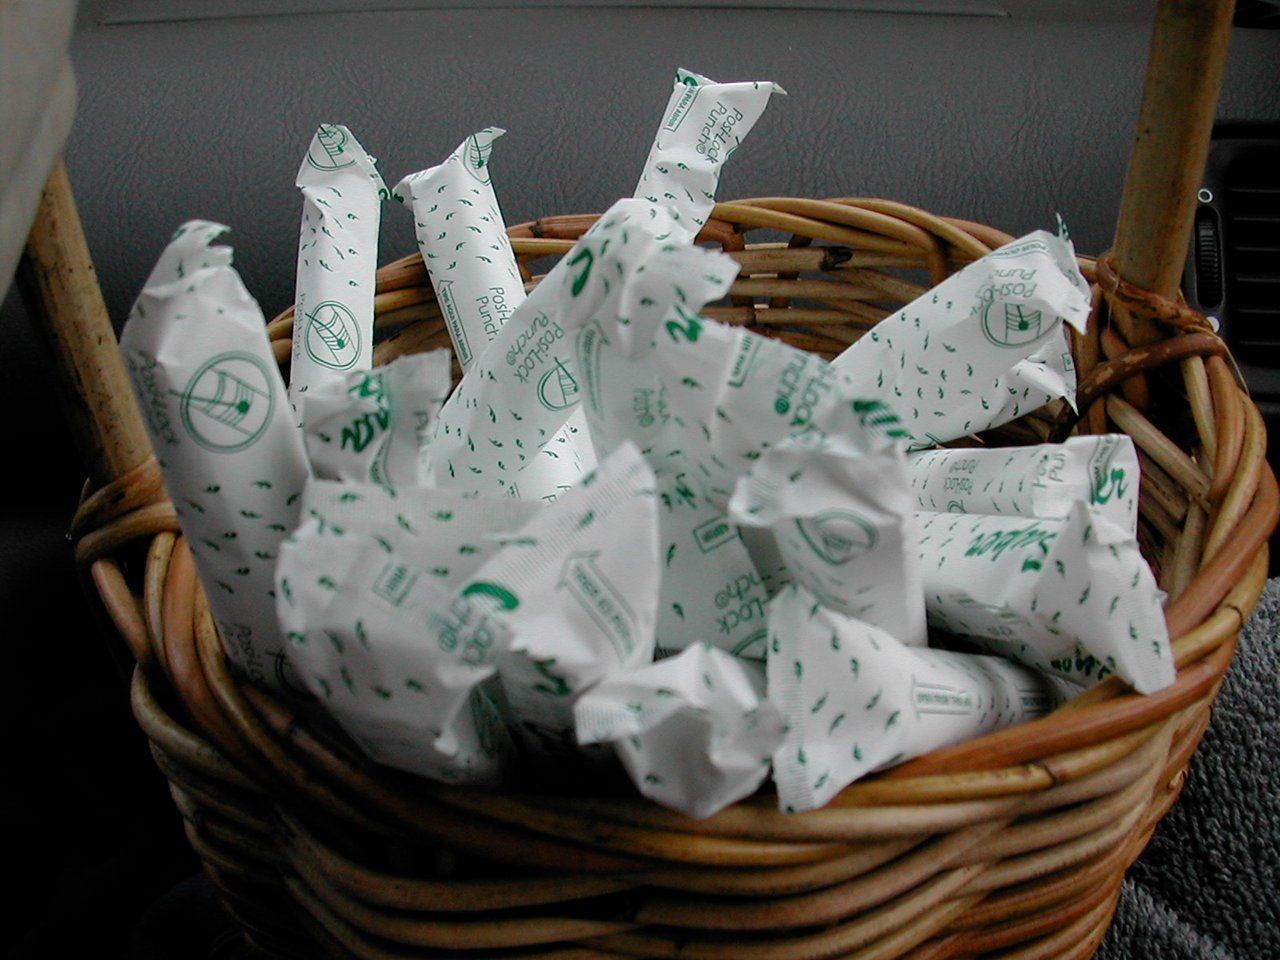 should menstrual products be subsidized?